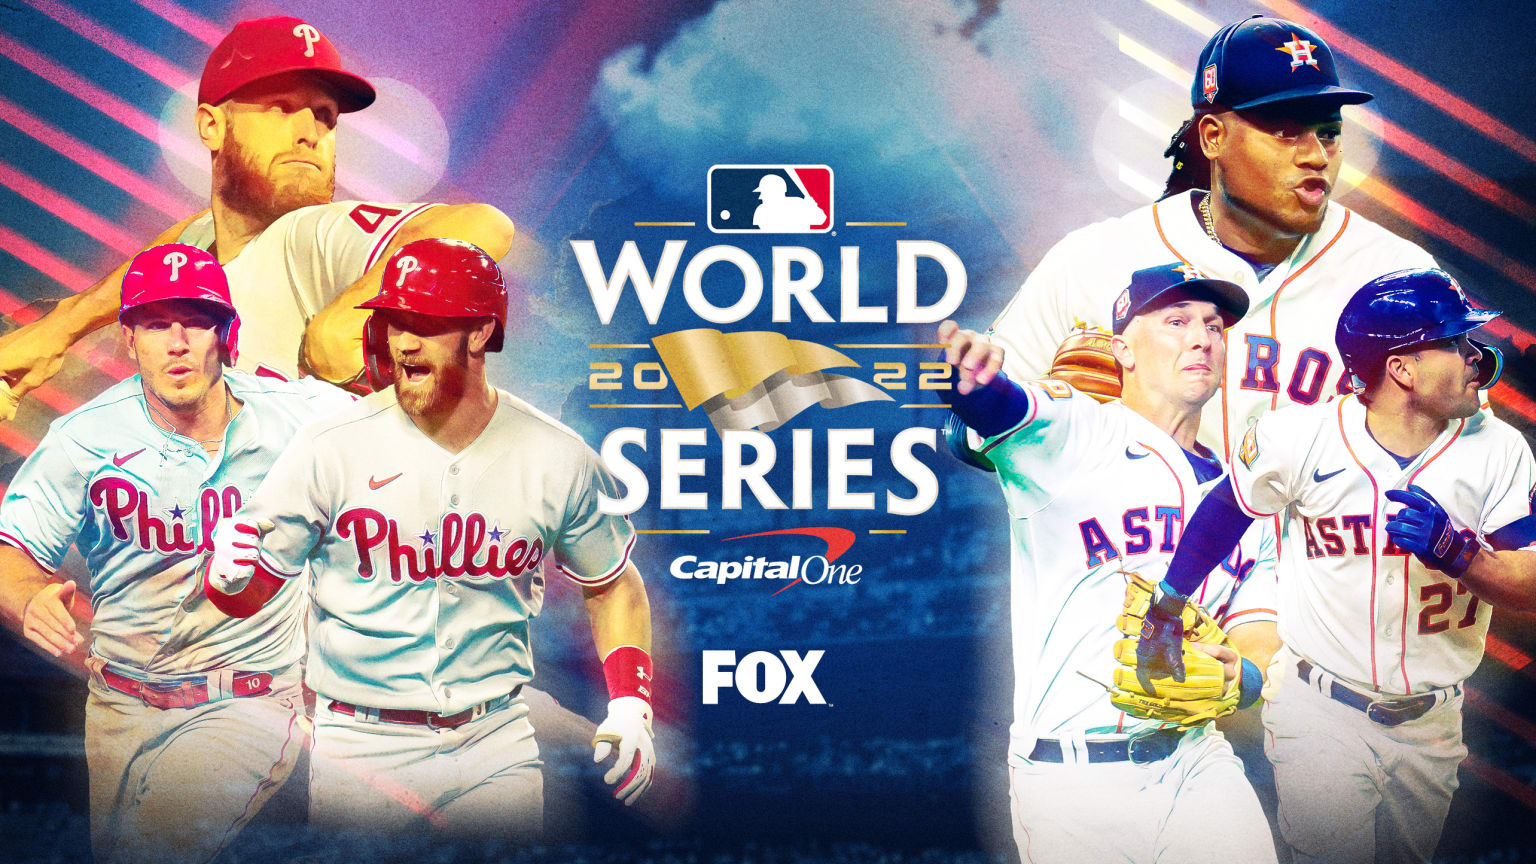 Three Phillies on the left and three Astros on the right, with the World Series logo in the middle